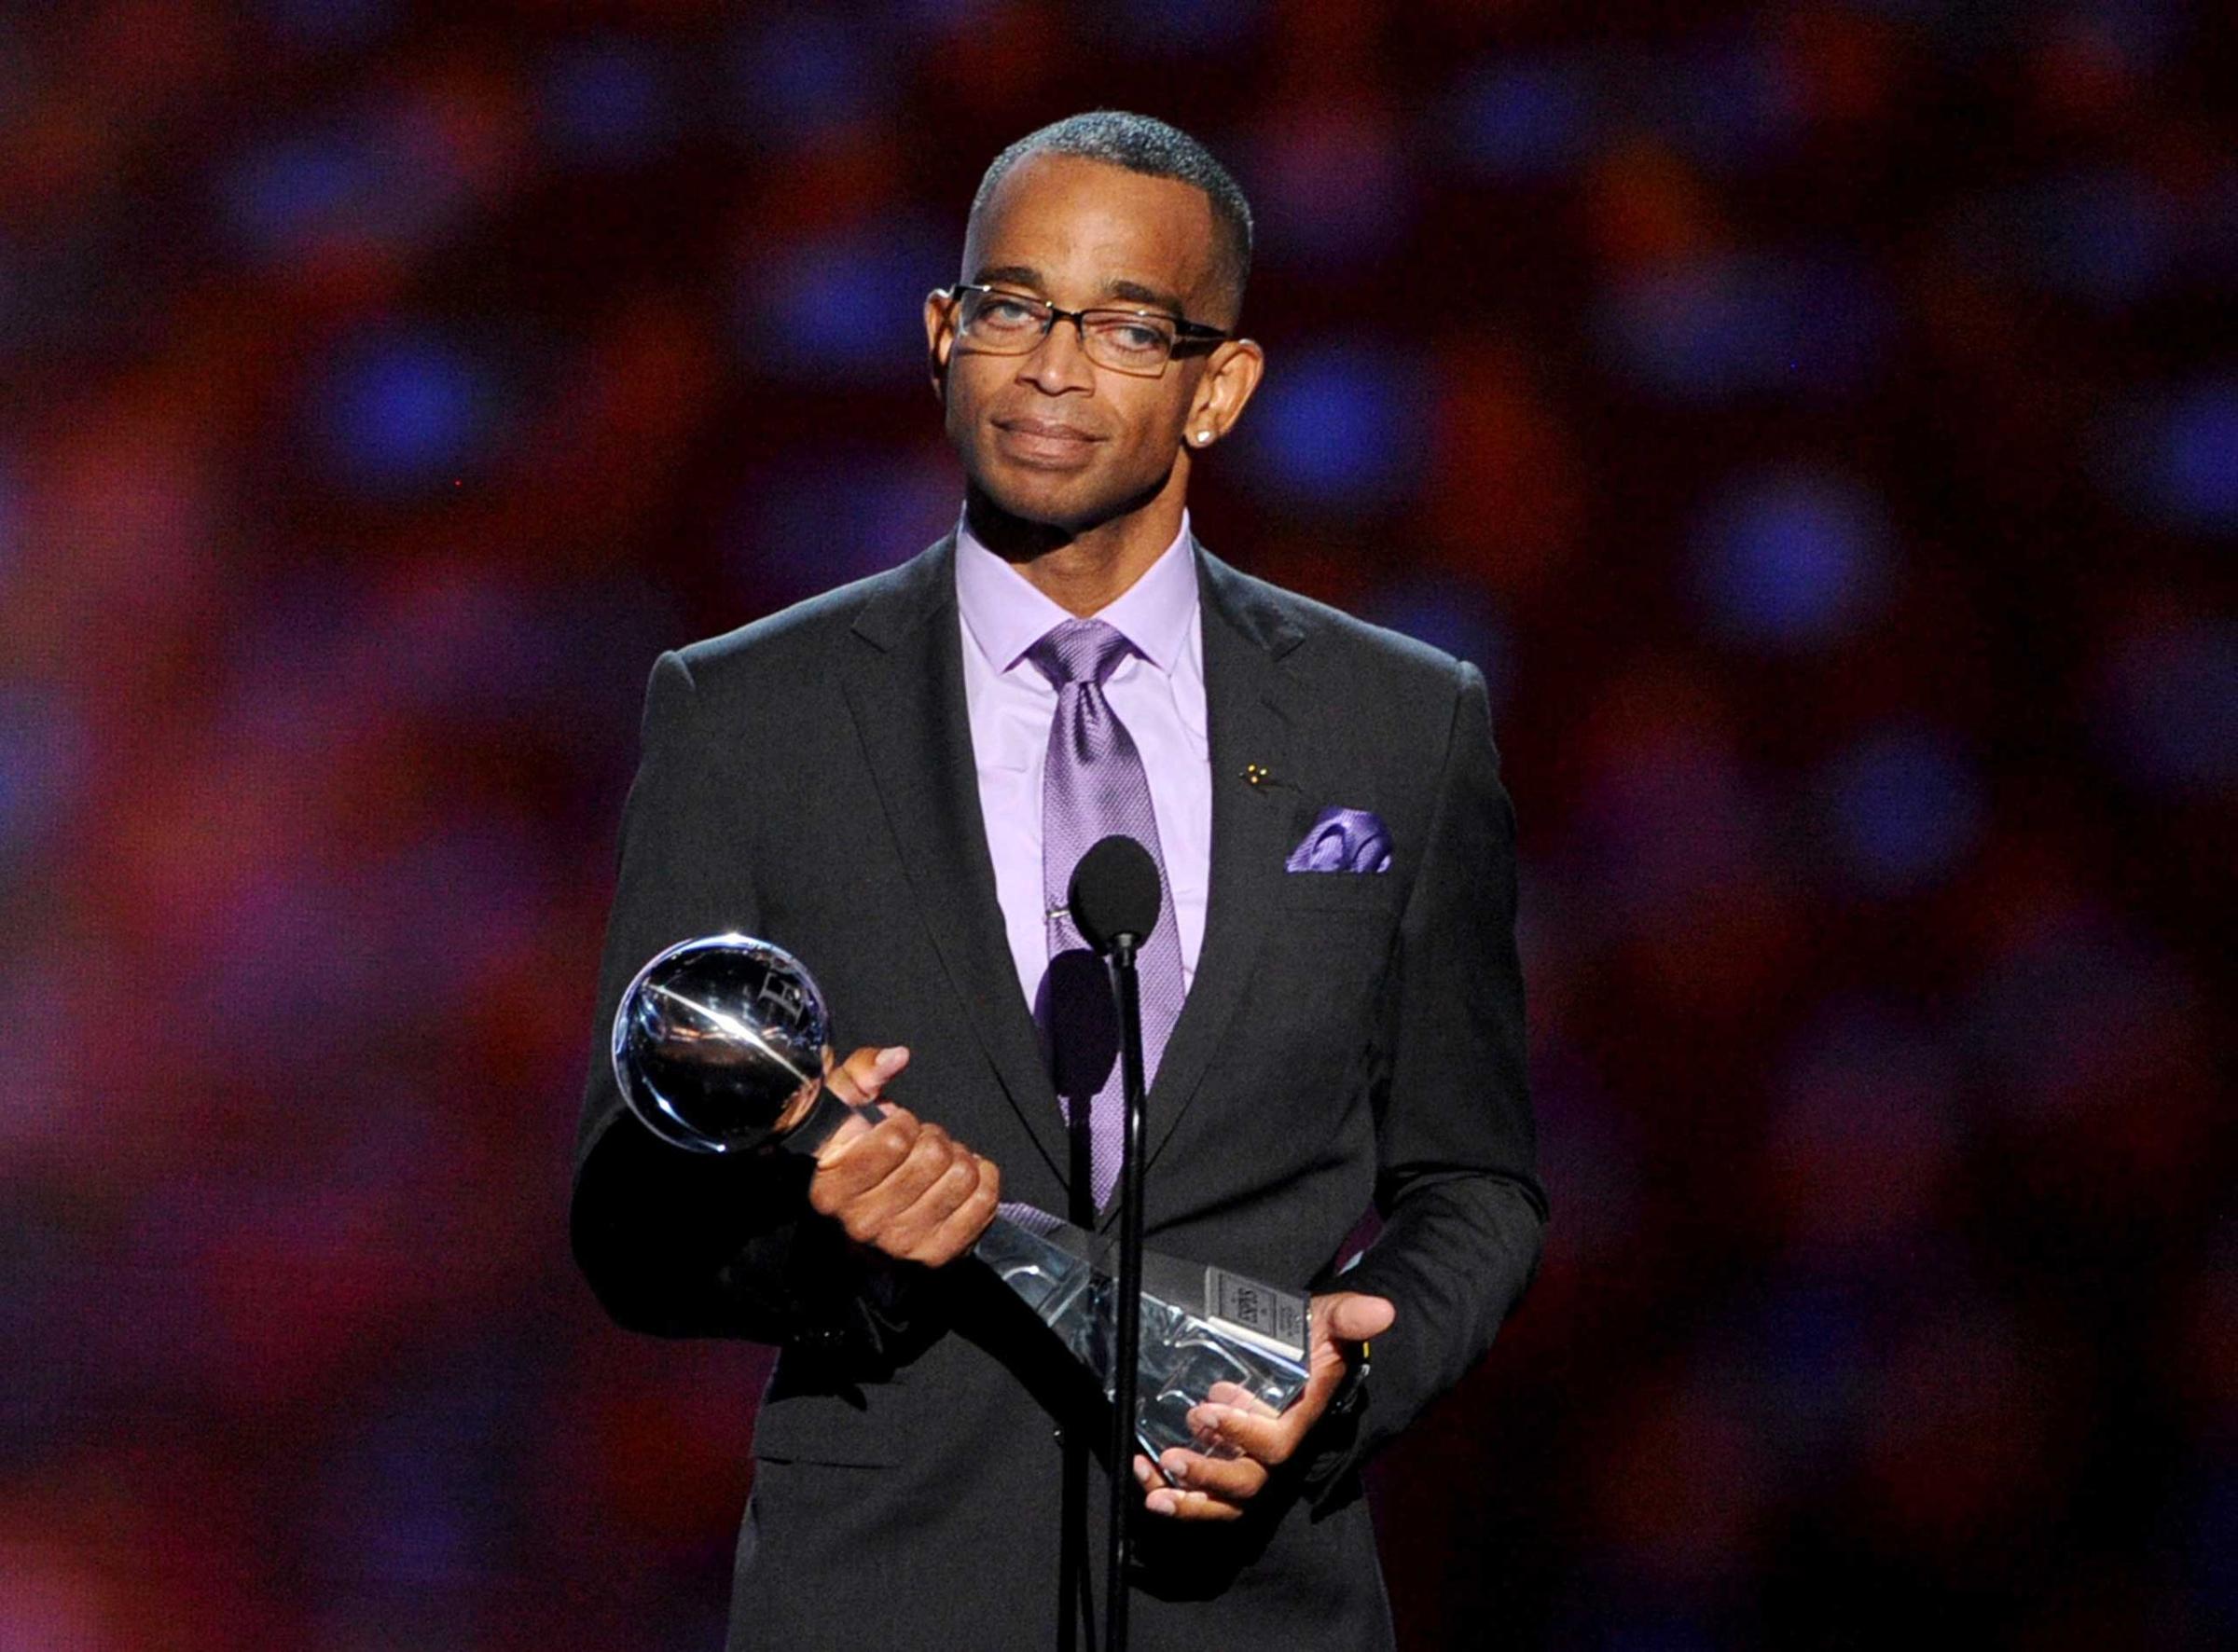 Scott accepts the 2014 Jimmy V Perseverance Award onstage during the 2014 ESPYS at Nokia Theatre L.A. Live on July 16, 2014 in Los Angeles.